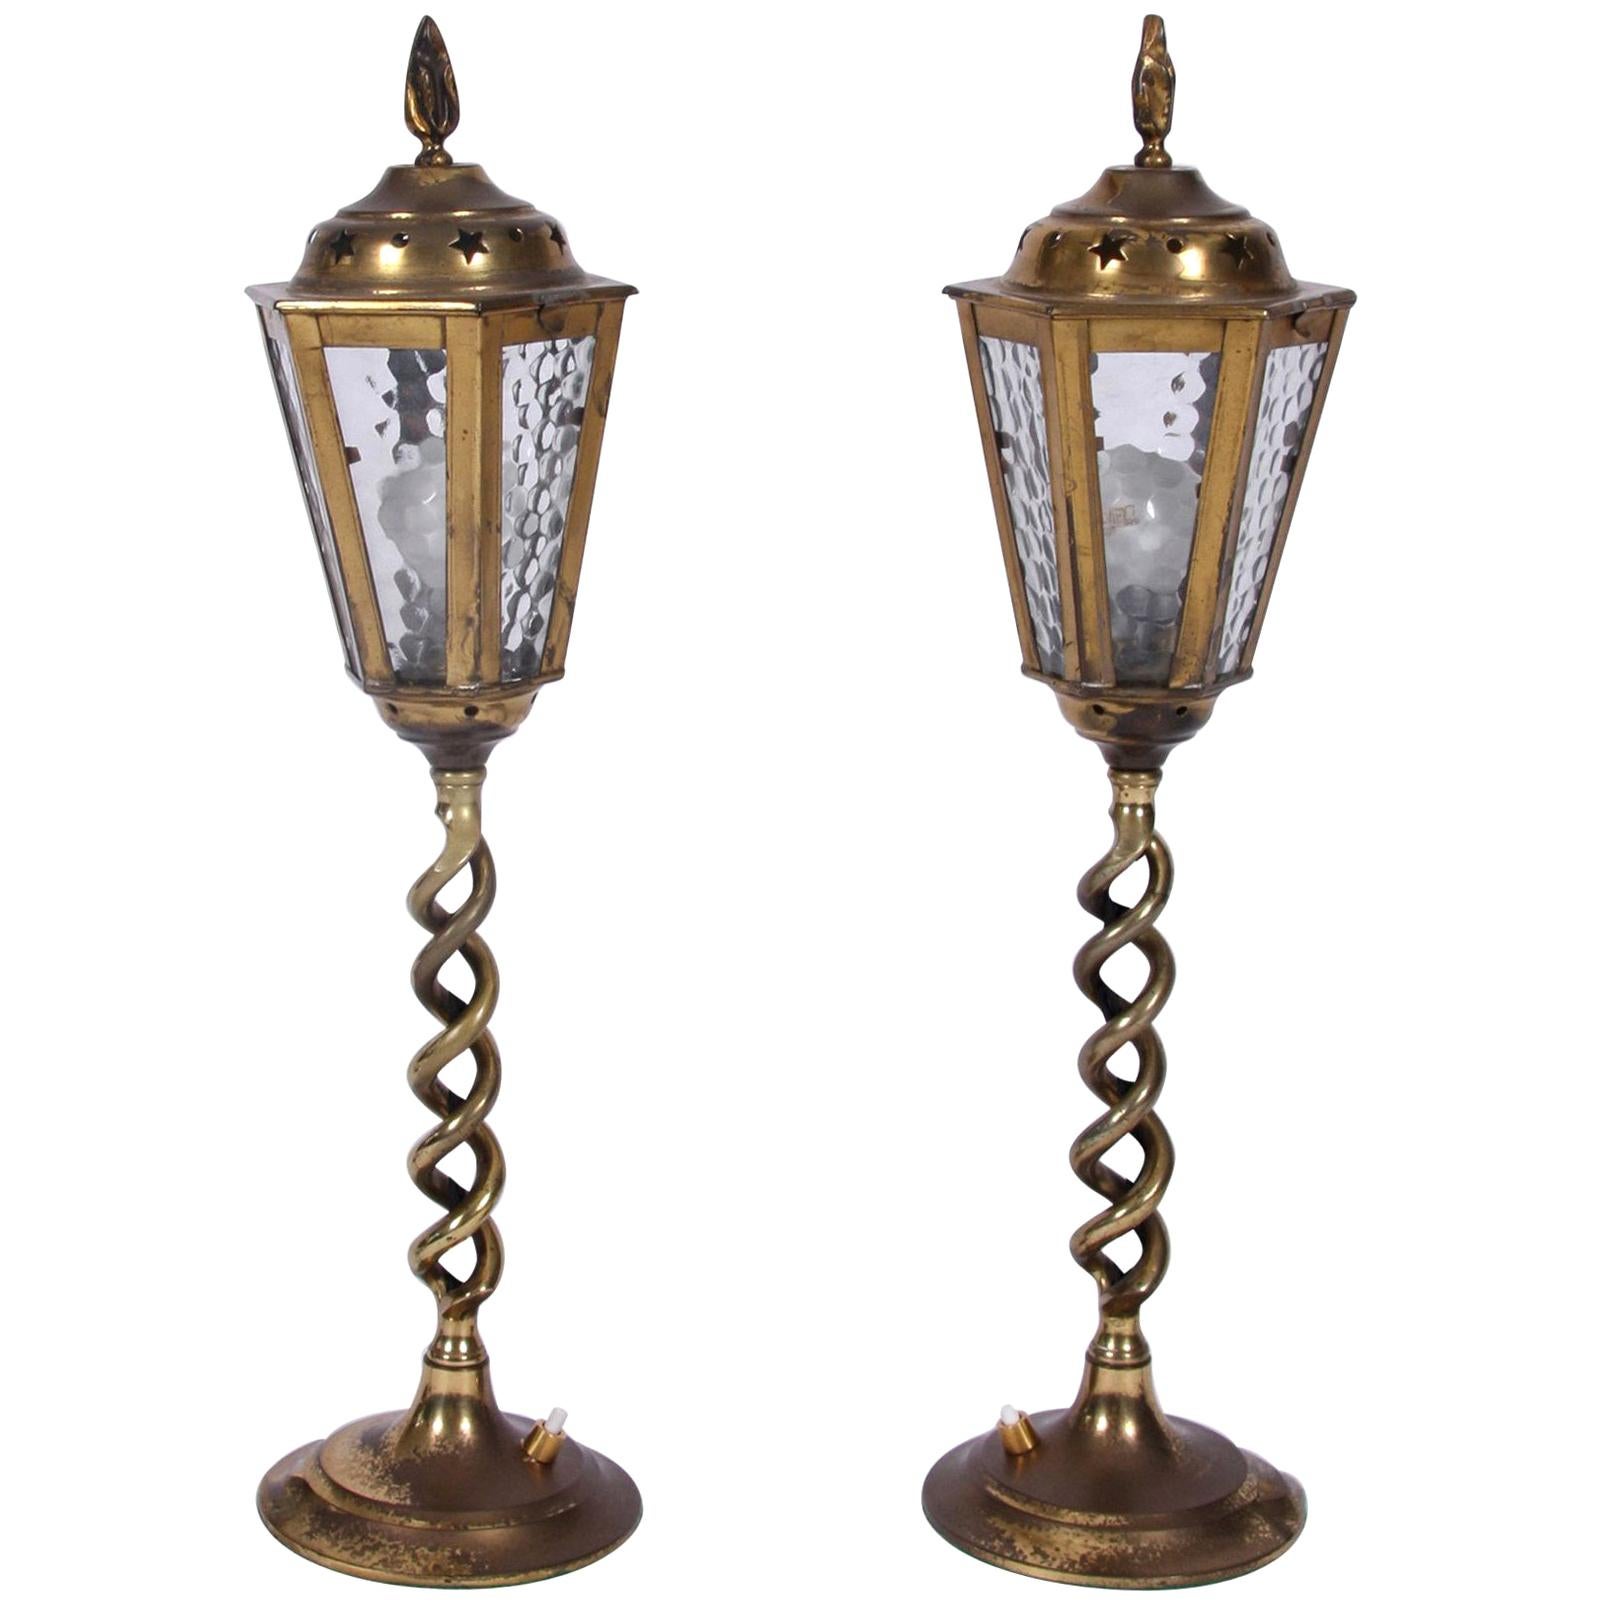 Midcentury Pair of Brass and Glass Table Lanterns with Star Detail For Sale